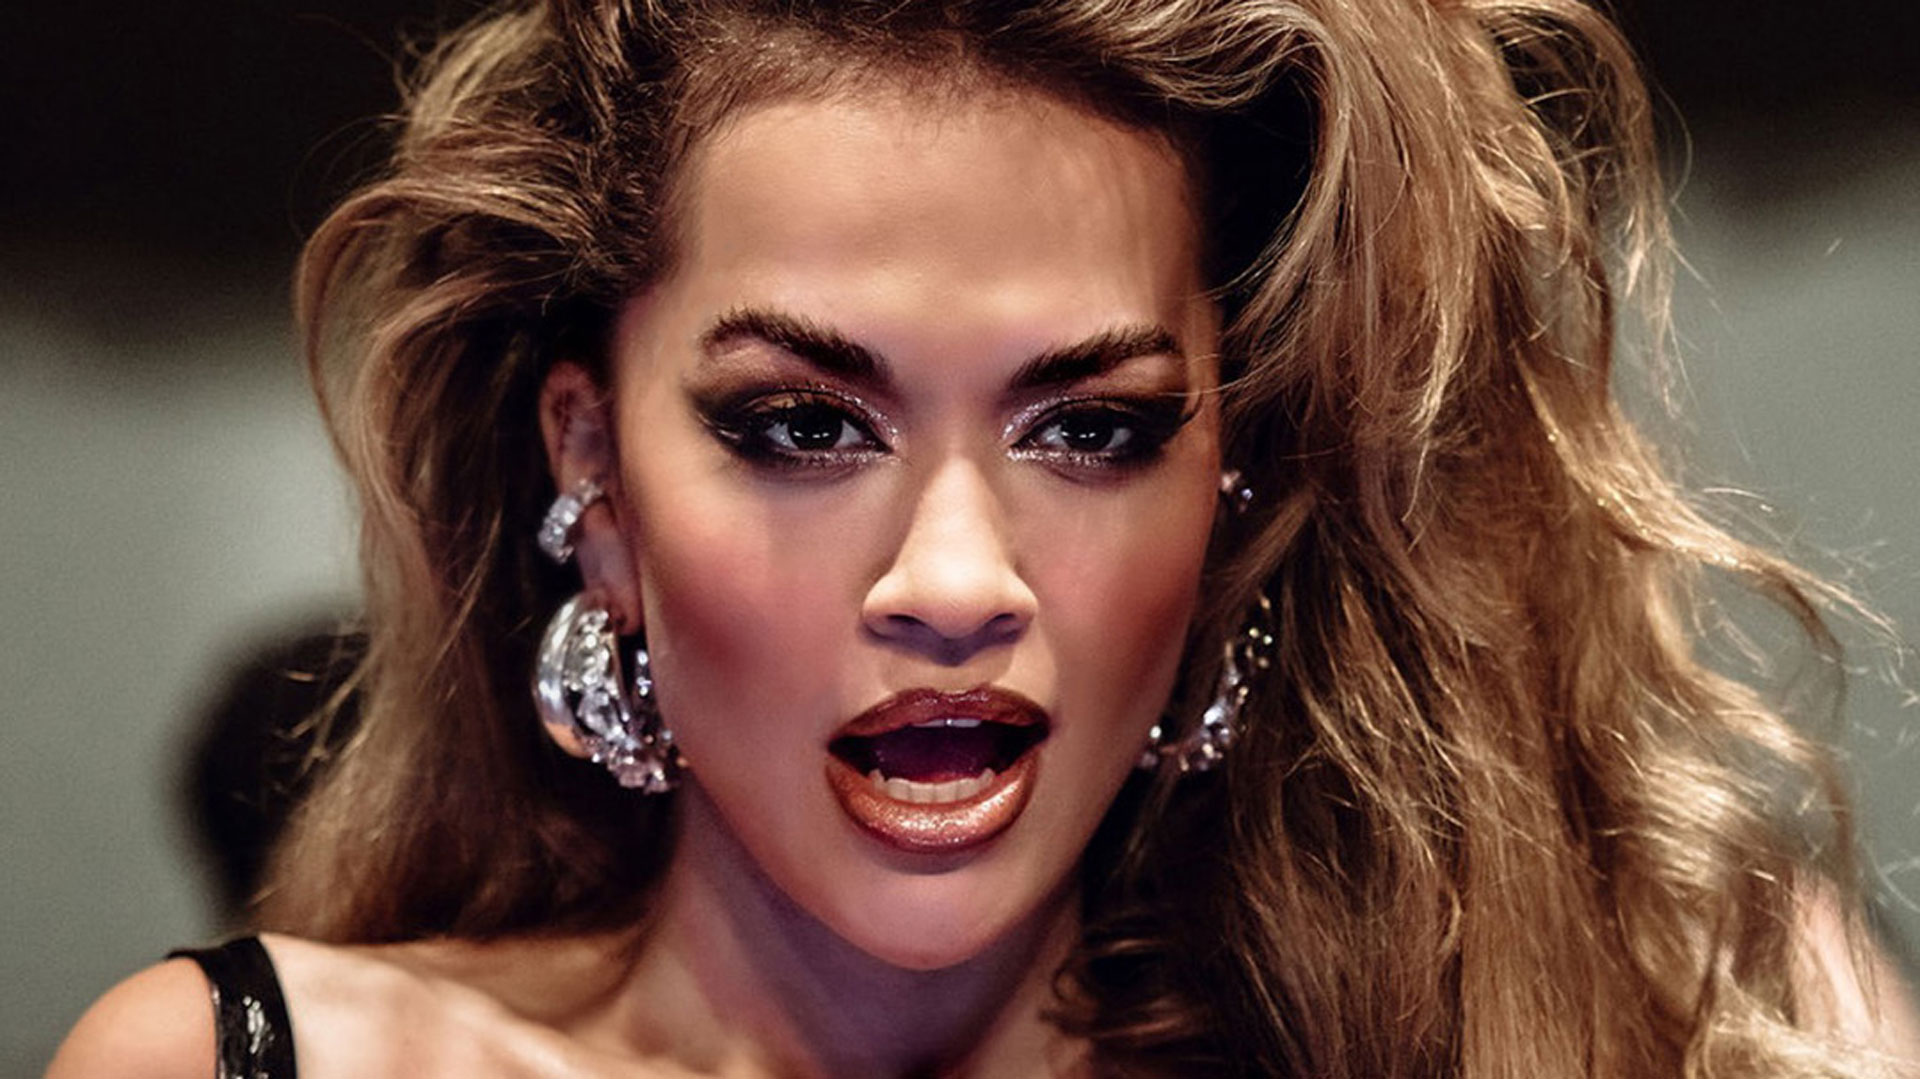 Rita Ora in the video for Praising You, an update of Praise You